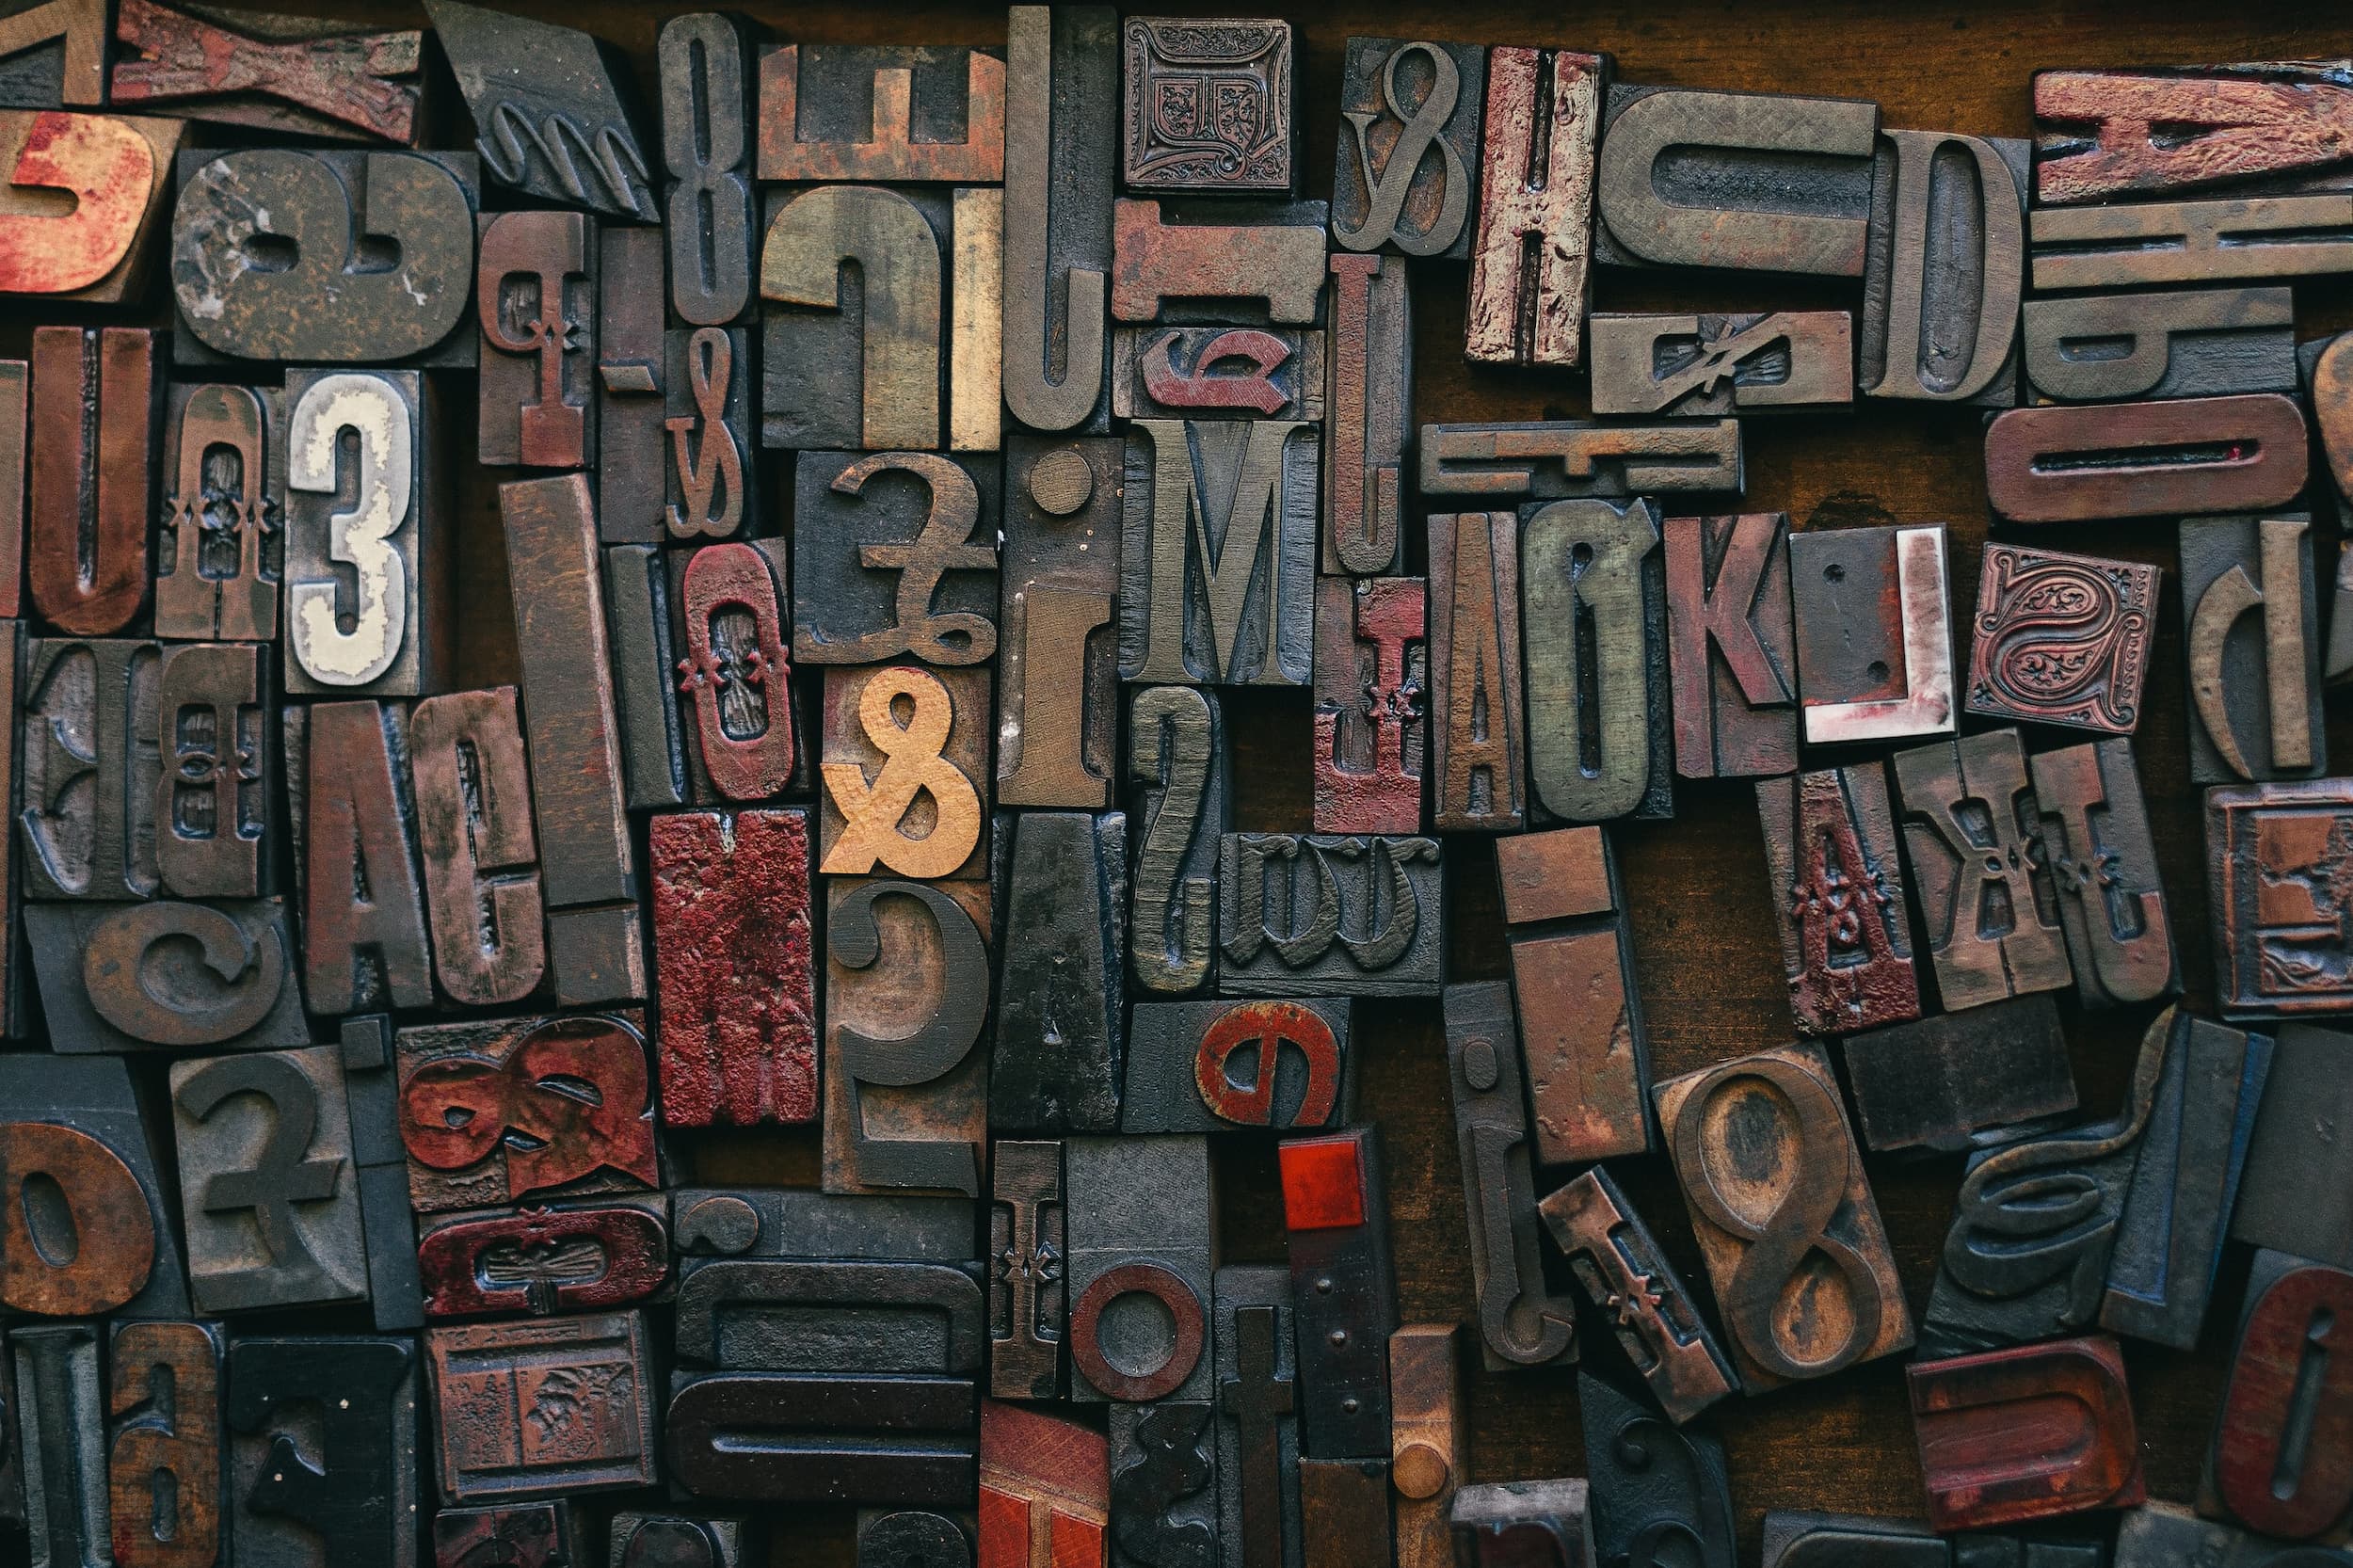 Array of rustic, used stamps arranged on rusted surface